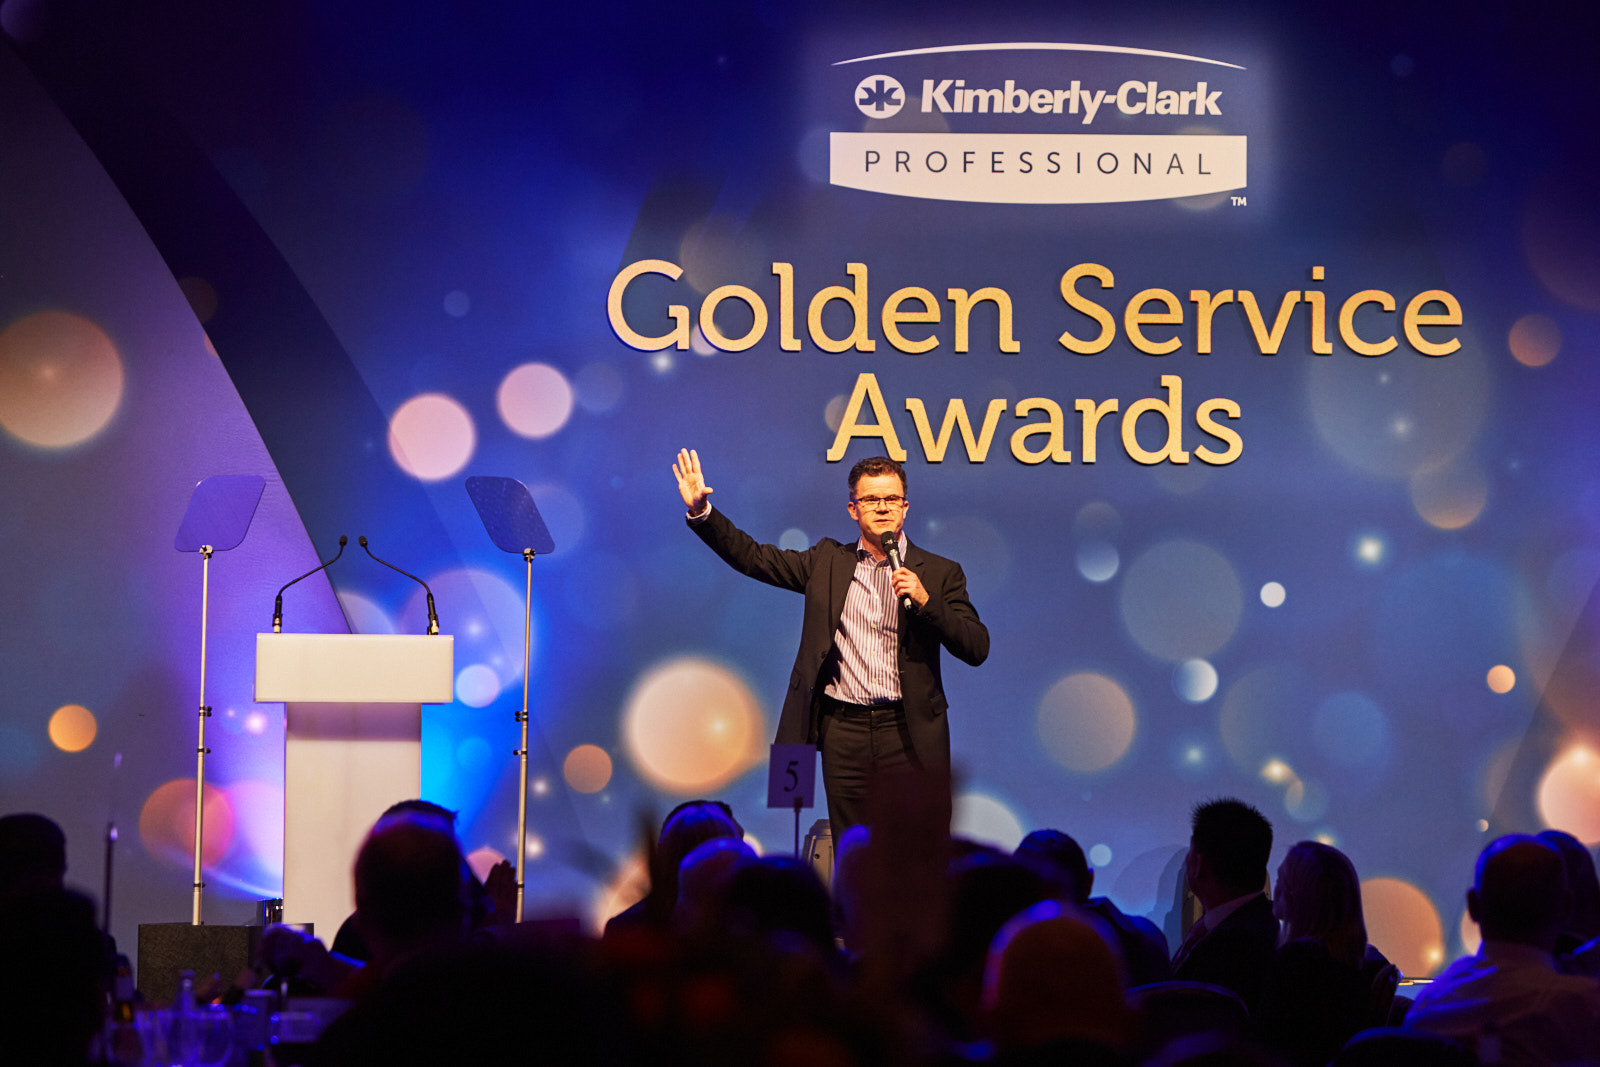 Golden Service Awards See Key Themes Of Respect, Diversity & Wellbeing